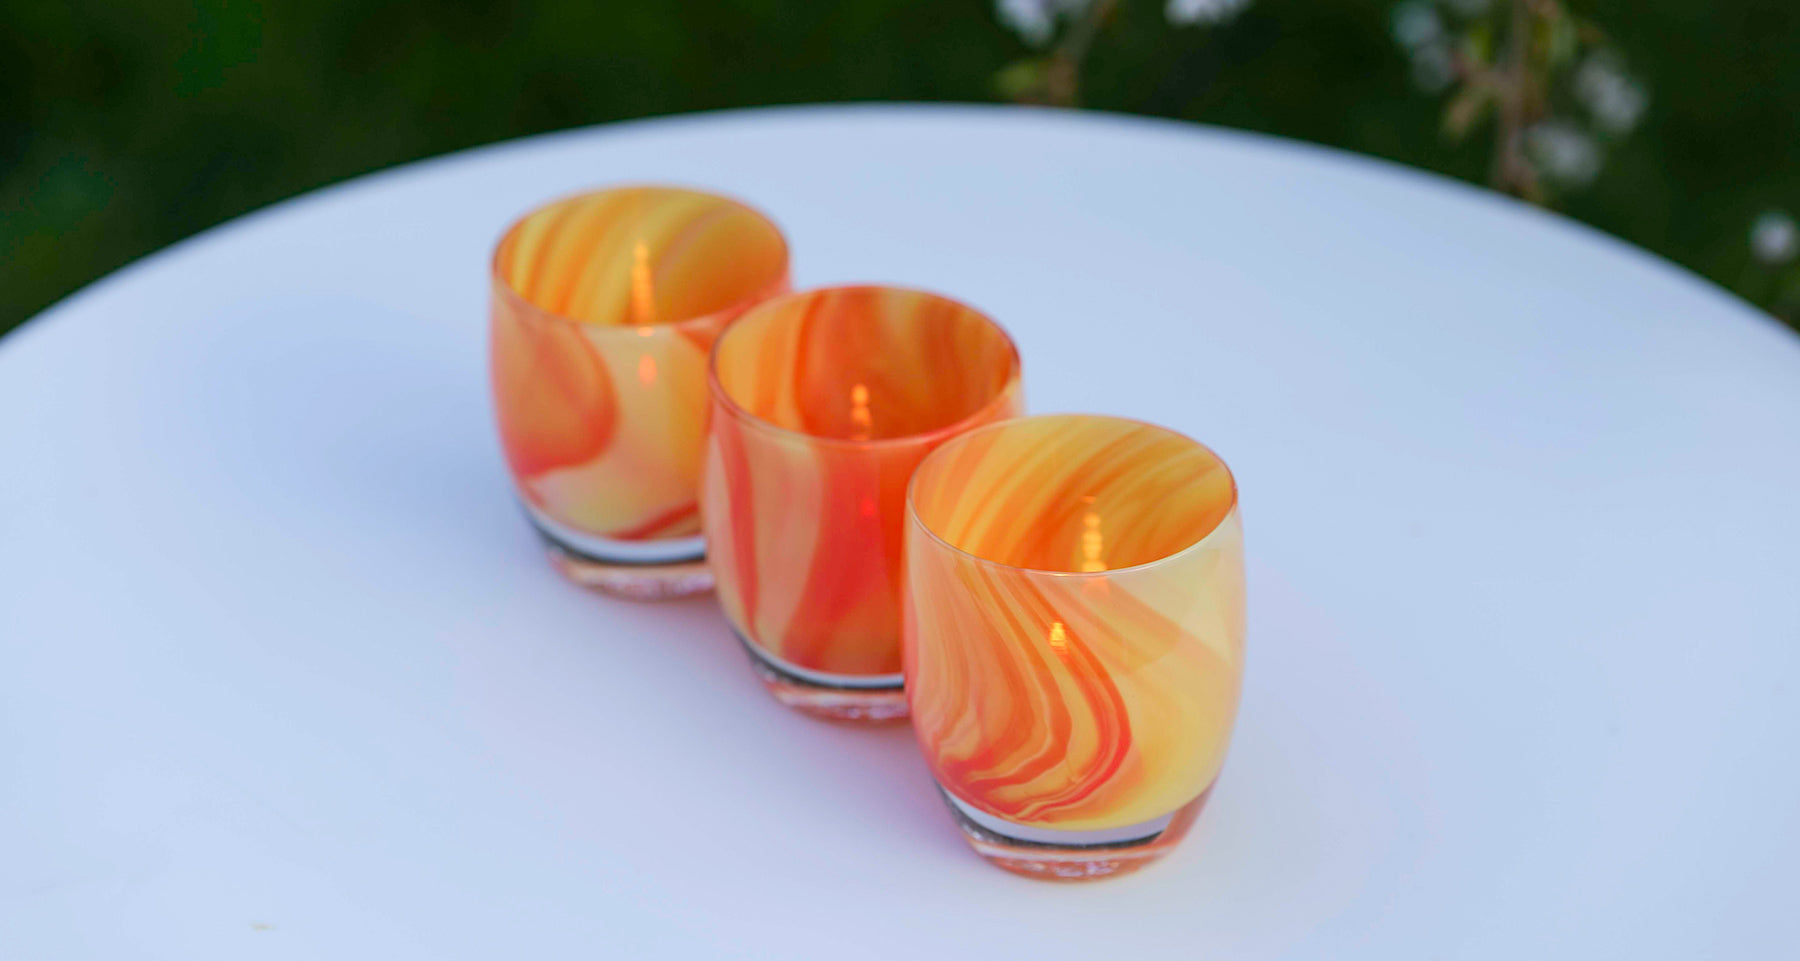 lifesaver, a swirled orange and cream colored hand-blown glass votive candle holder, sitting outside grouped in a line of 3 on a white table.